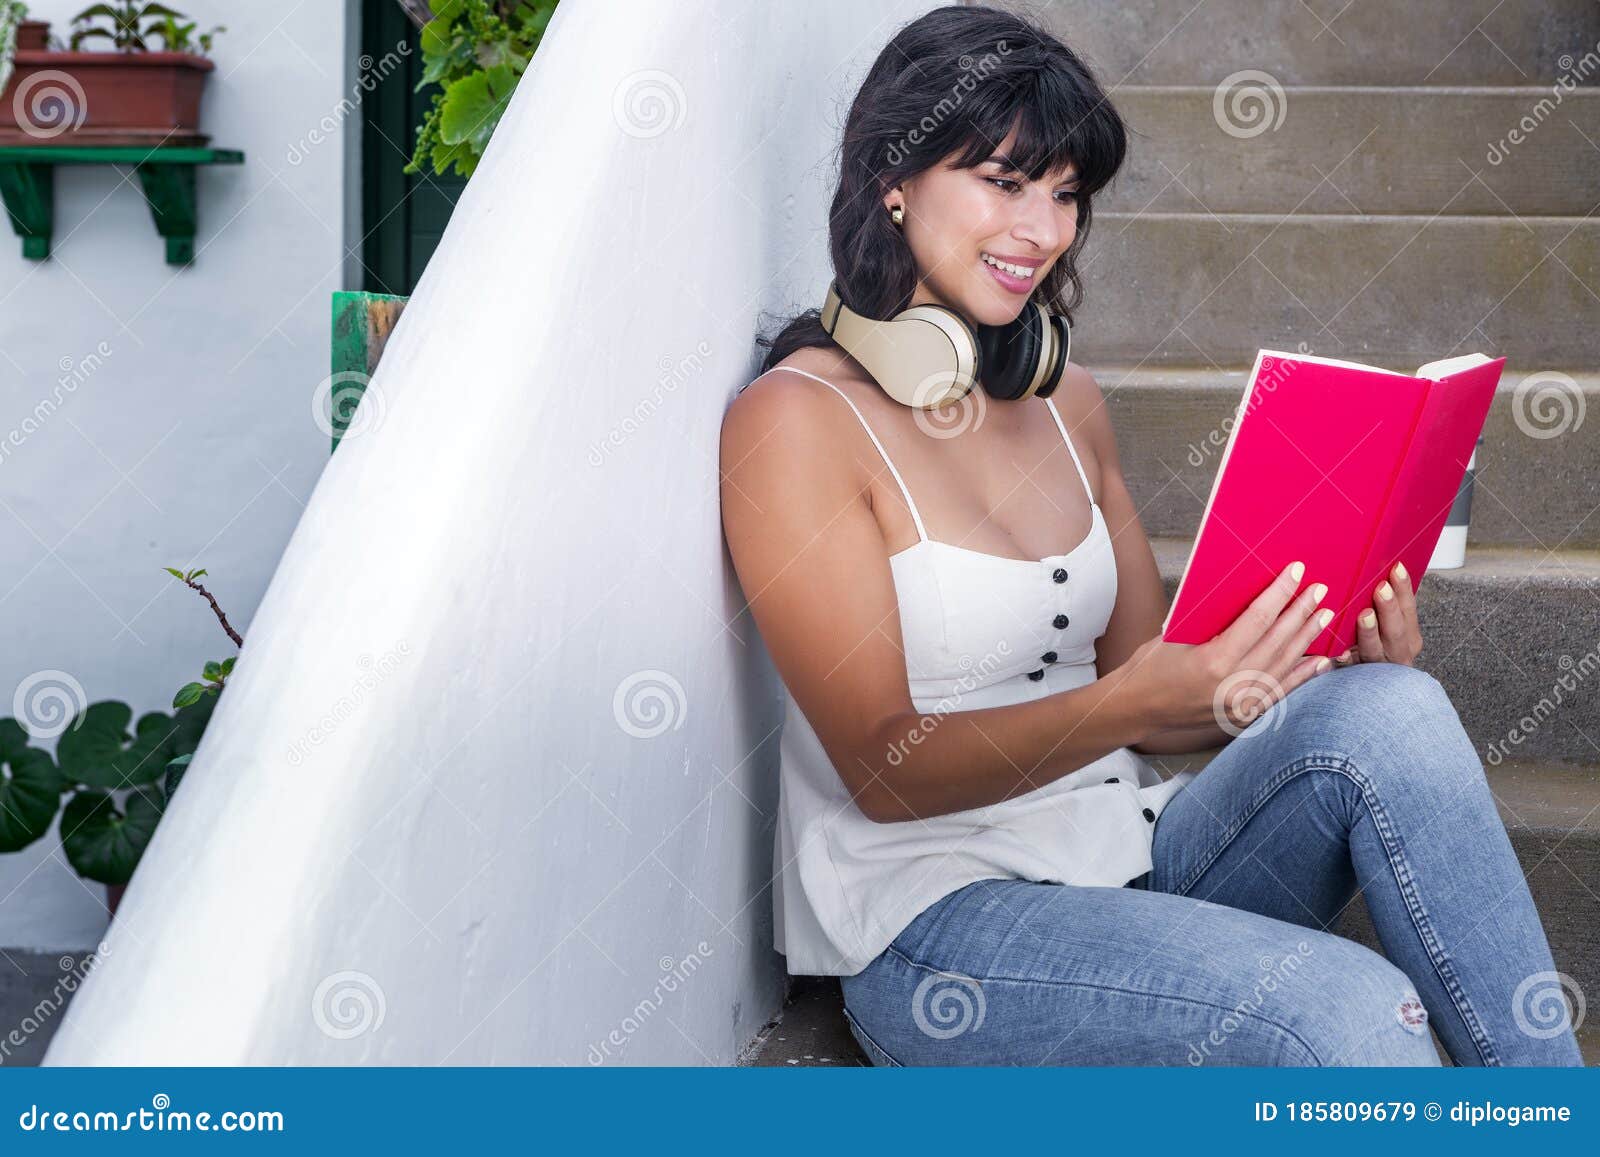 Cheerful Ethnic Female Reading Book On Steps Stock Image Image Of